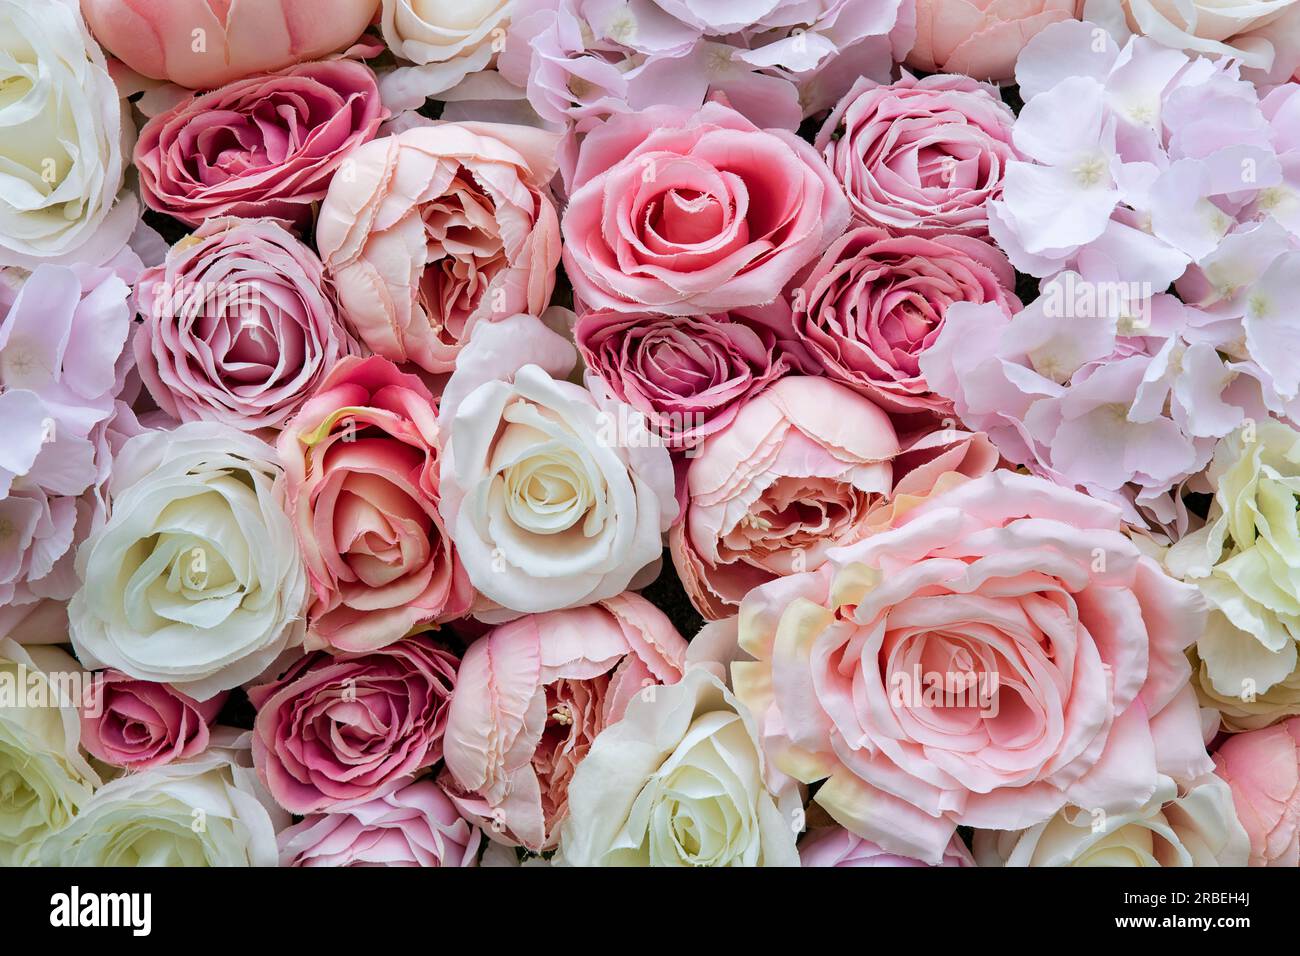 Artificial flowers such as peonies, hydrangeas and roses in pastel colors set closely together to form a beautiful and romantic background Stock Photo